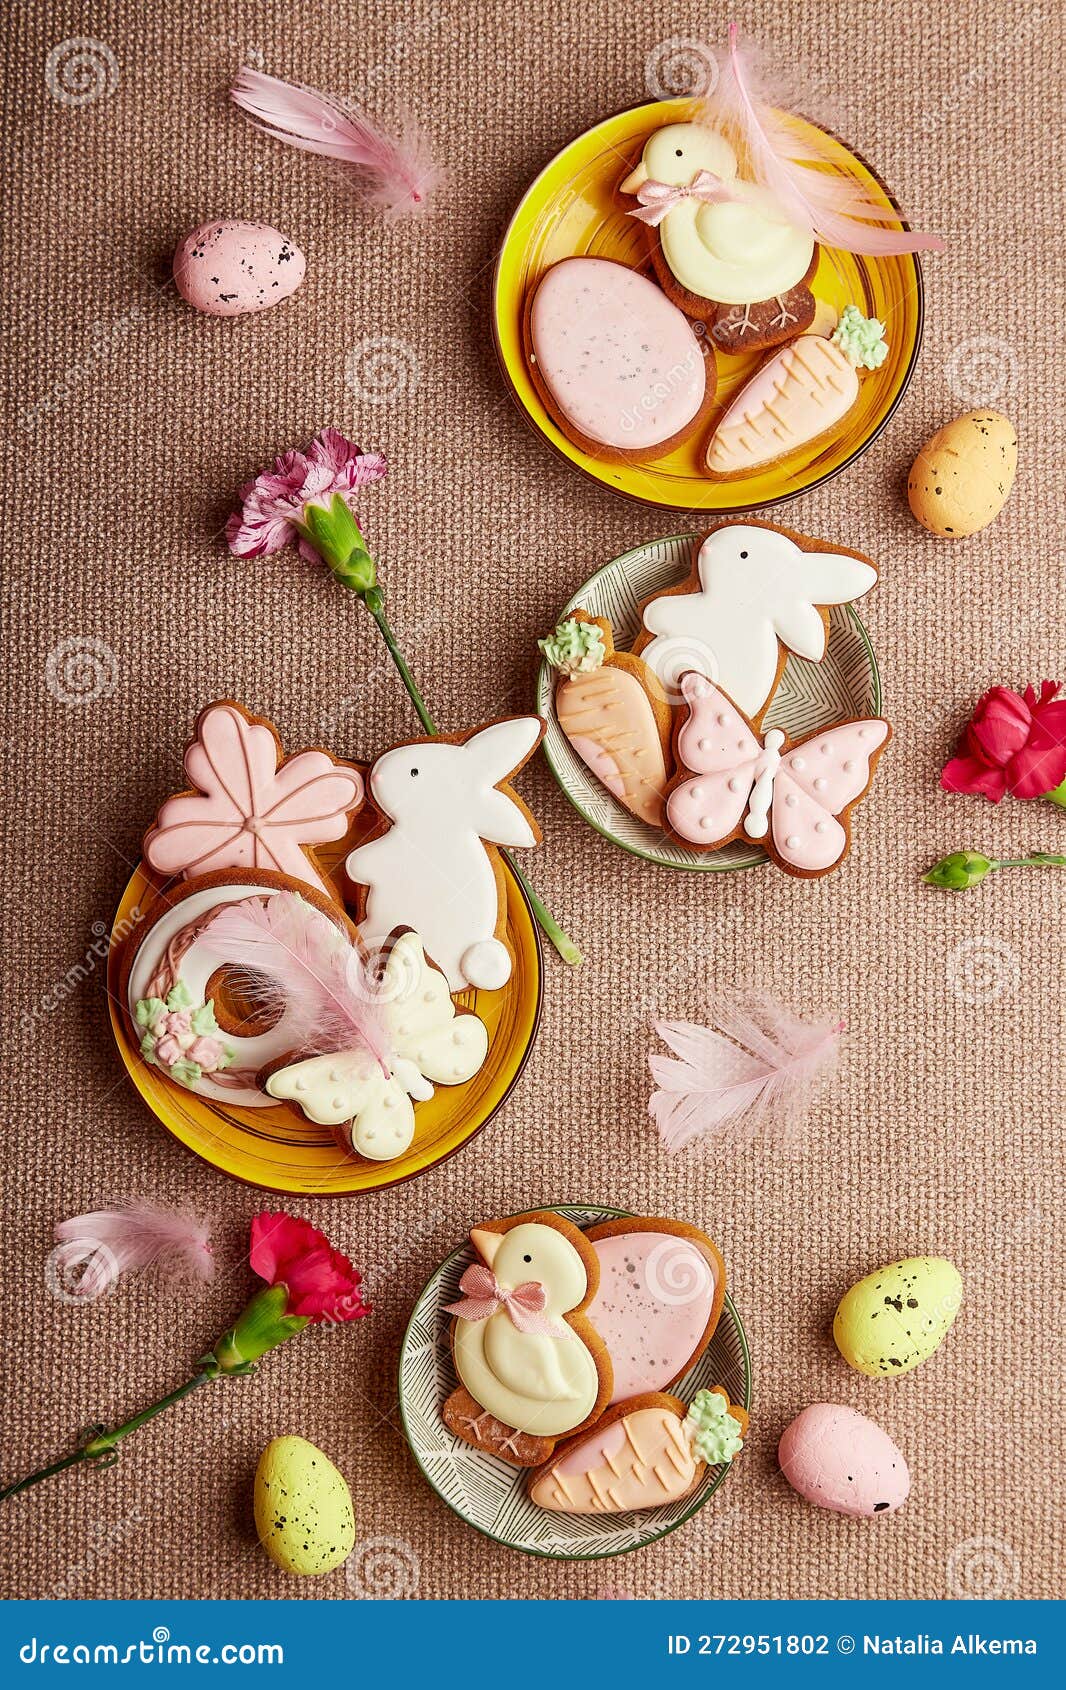 Decorated Aesthetic Easter Cookies, Pink Flowers with Feathers and Eggs. Spring Pastel Background Stock Photo - Image of dessert, food: 272951802